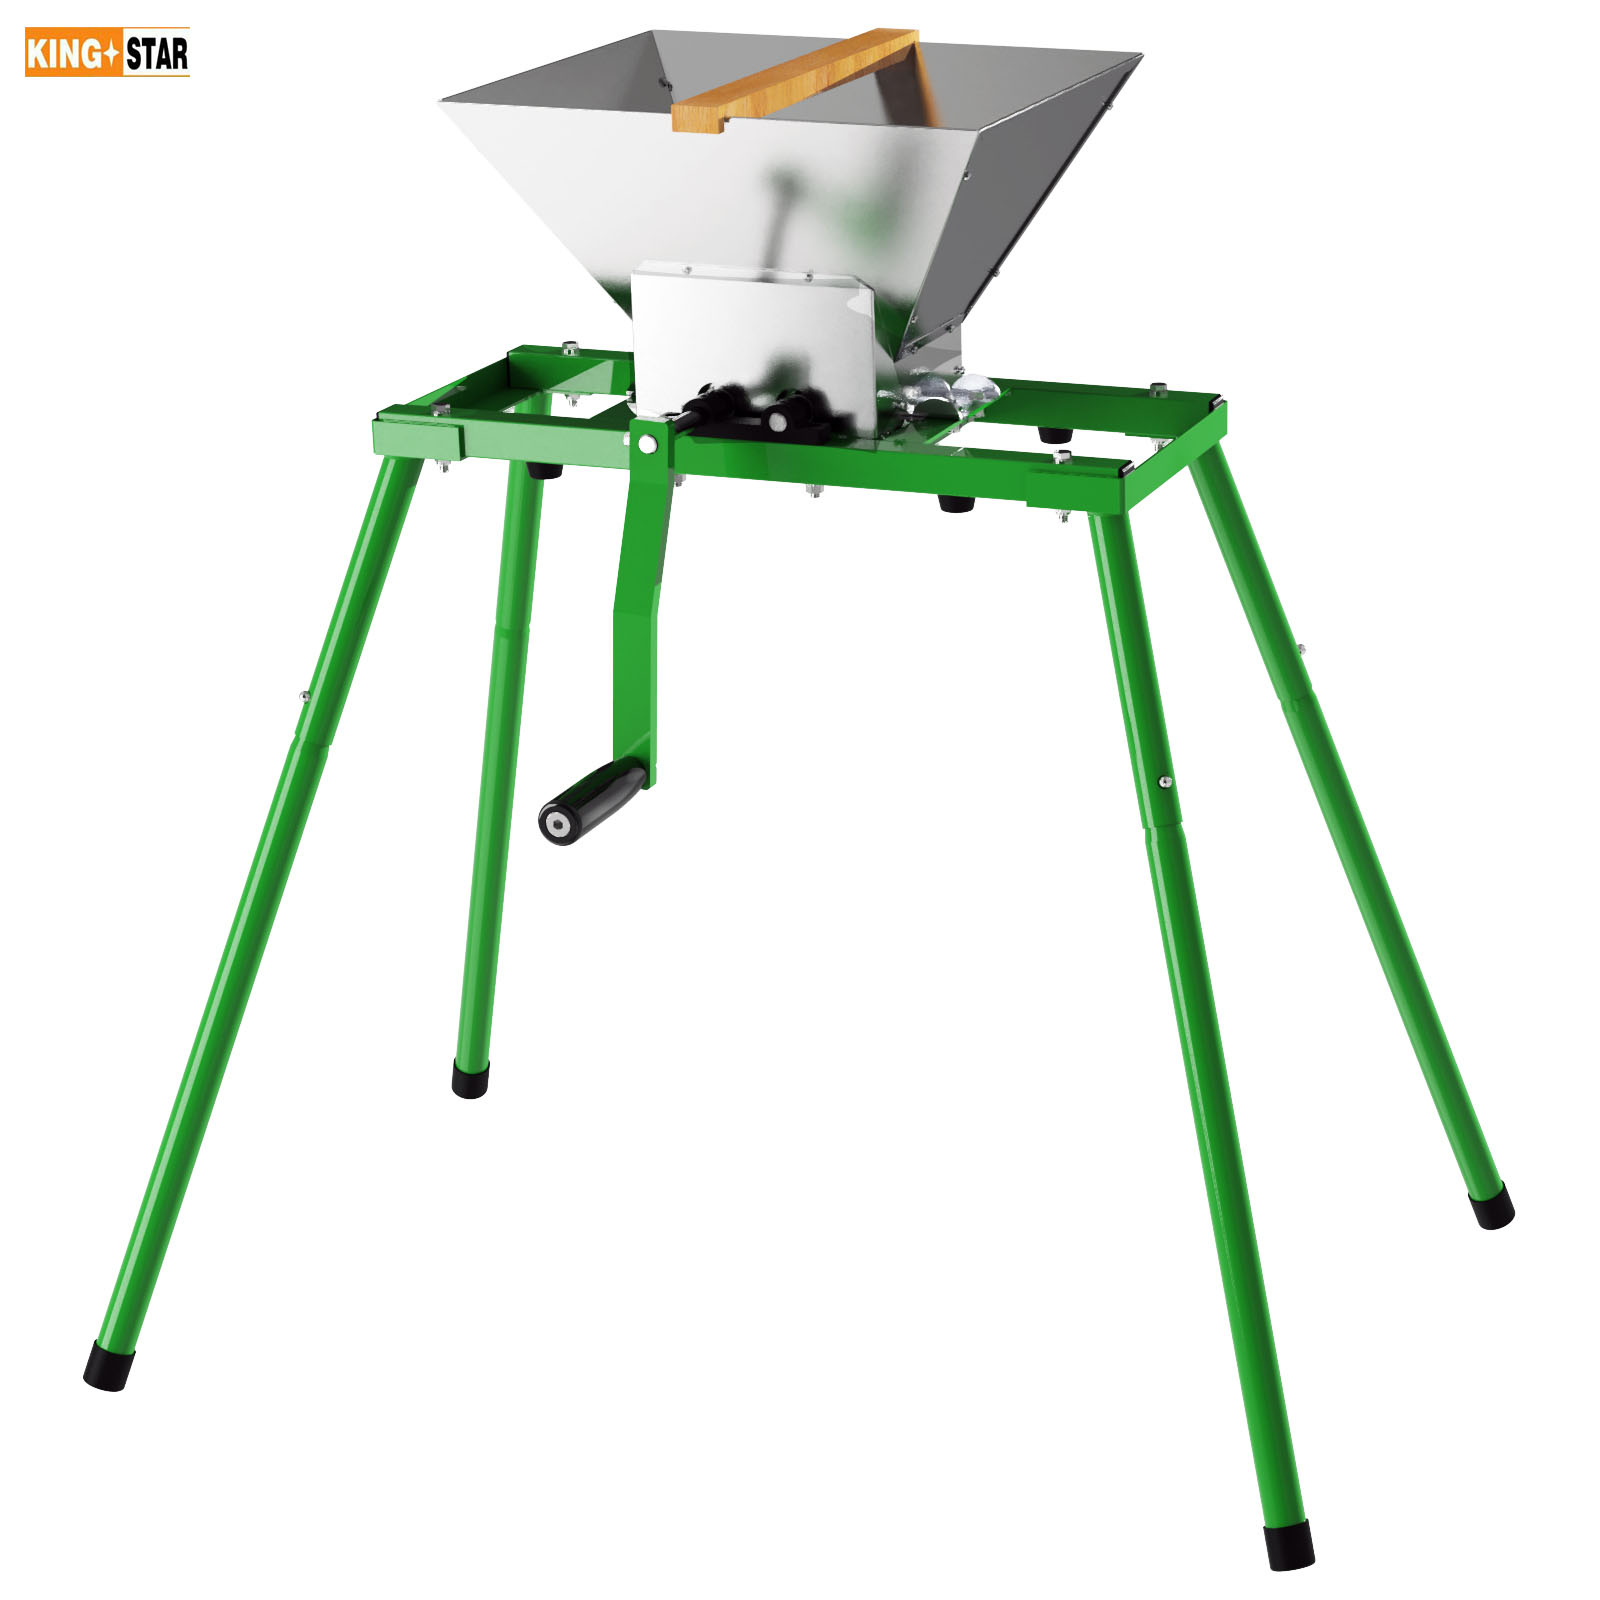 7L Stainless Steel Fruit Crusher with stand